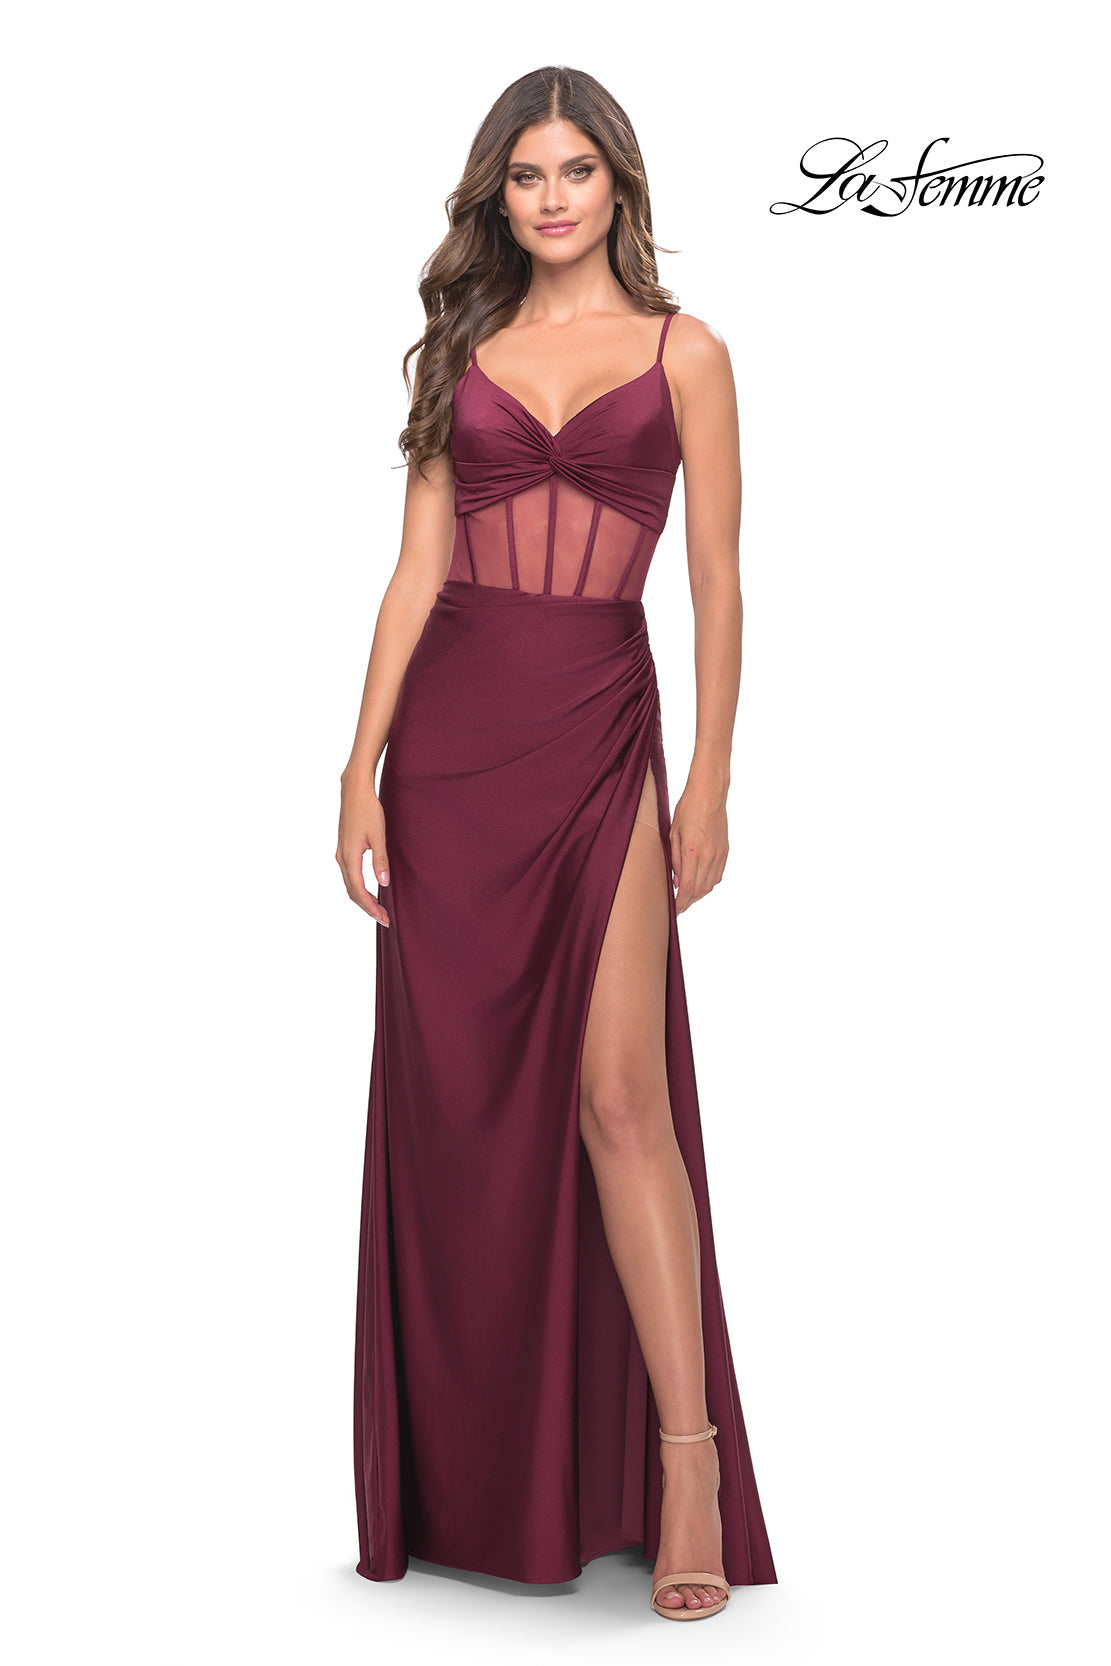 sultry bodice corset dress